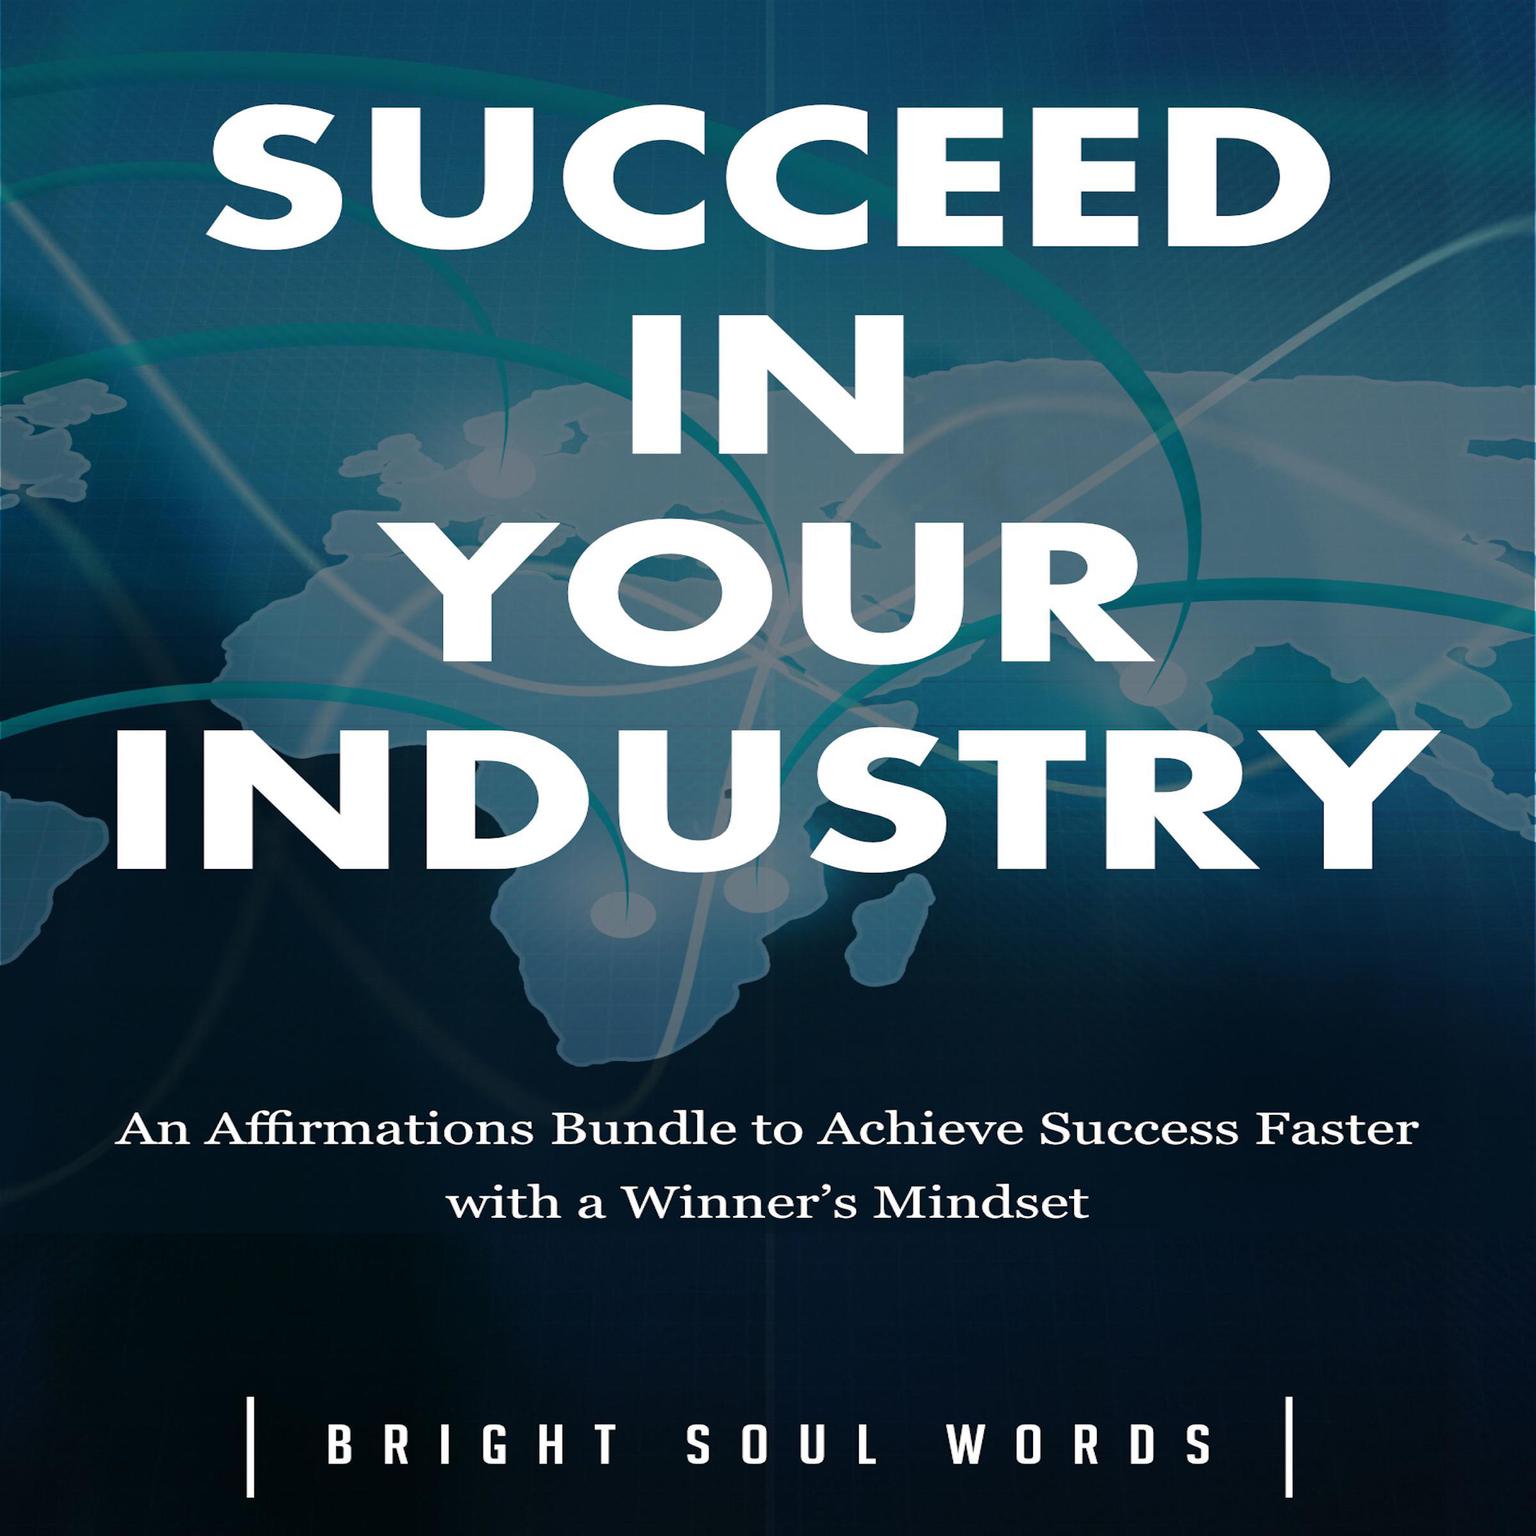 Succeed in Your Industry: An Affirmations Bundle to Achieve Success Faster with a Winner’s Mindset Audiobook, by Bright Soul Words